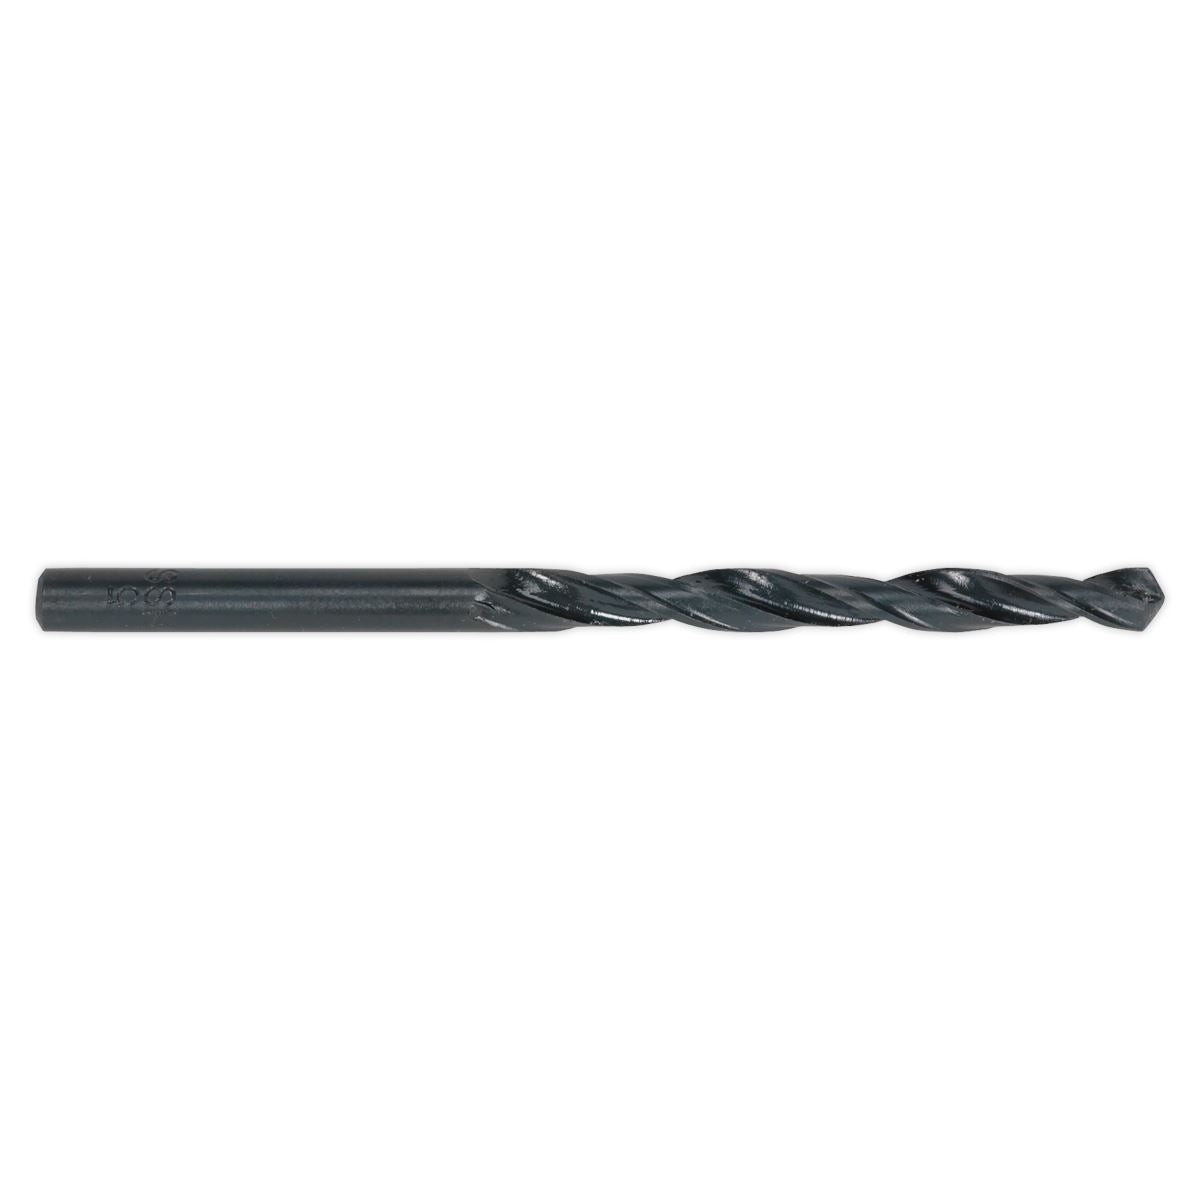 Sealey HSS Roll Forged Drill Bit Ø9.5mm Pack of 10